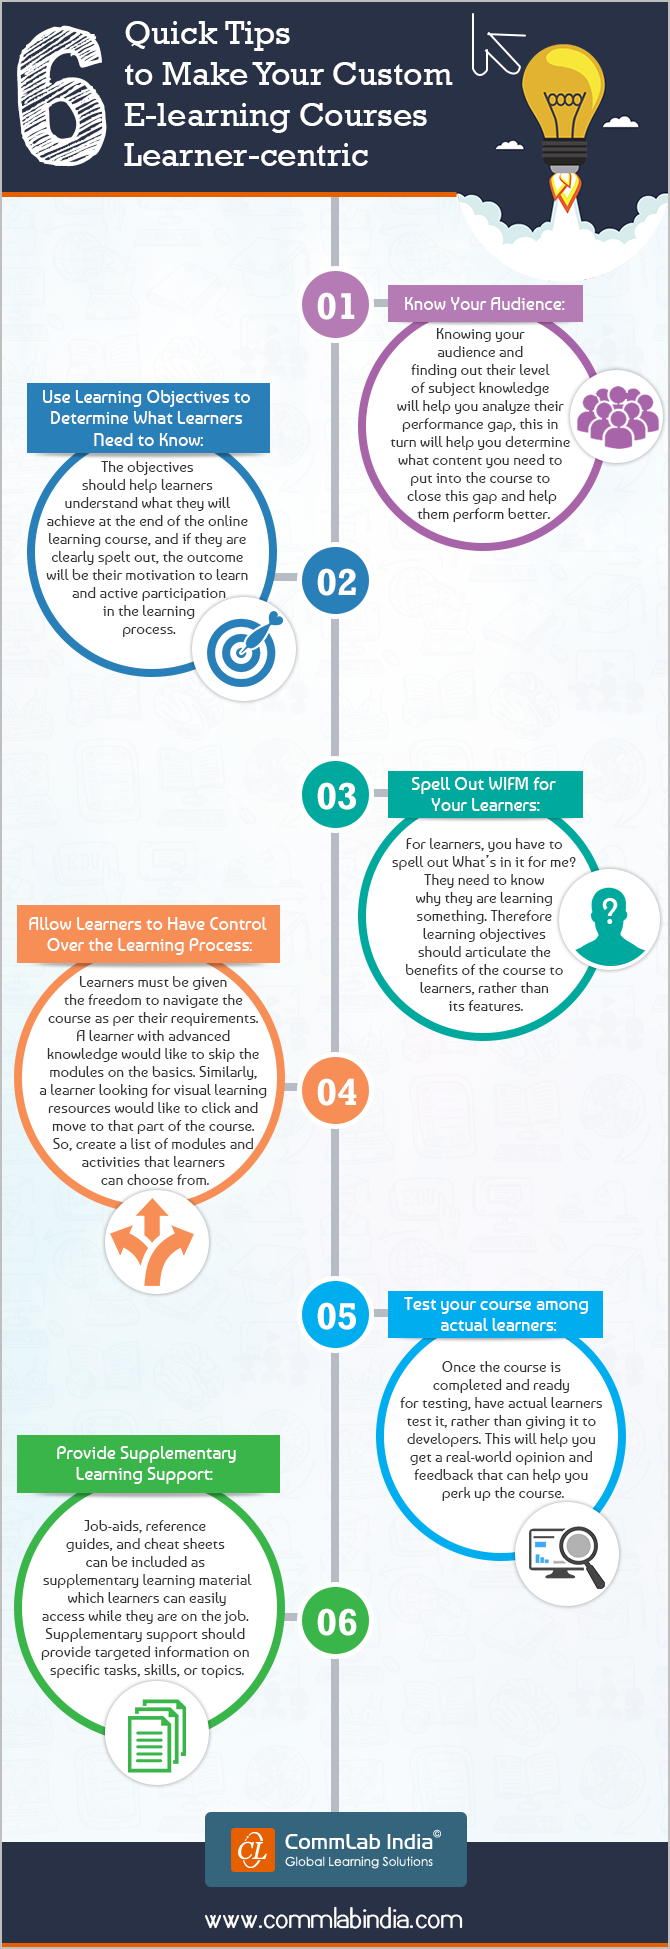 6 Quick Tips to Make Your Custom E-learning Courses Learner-Centric [Infographic]